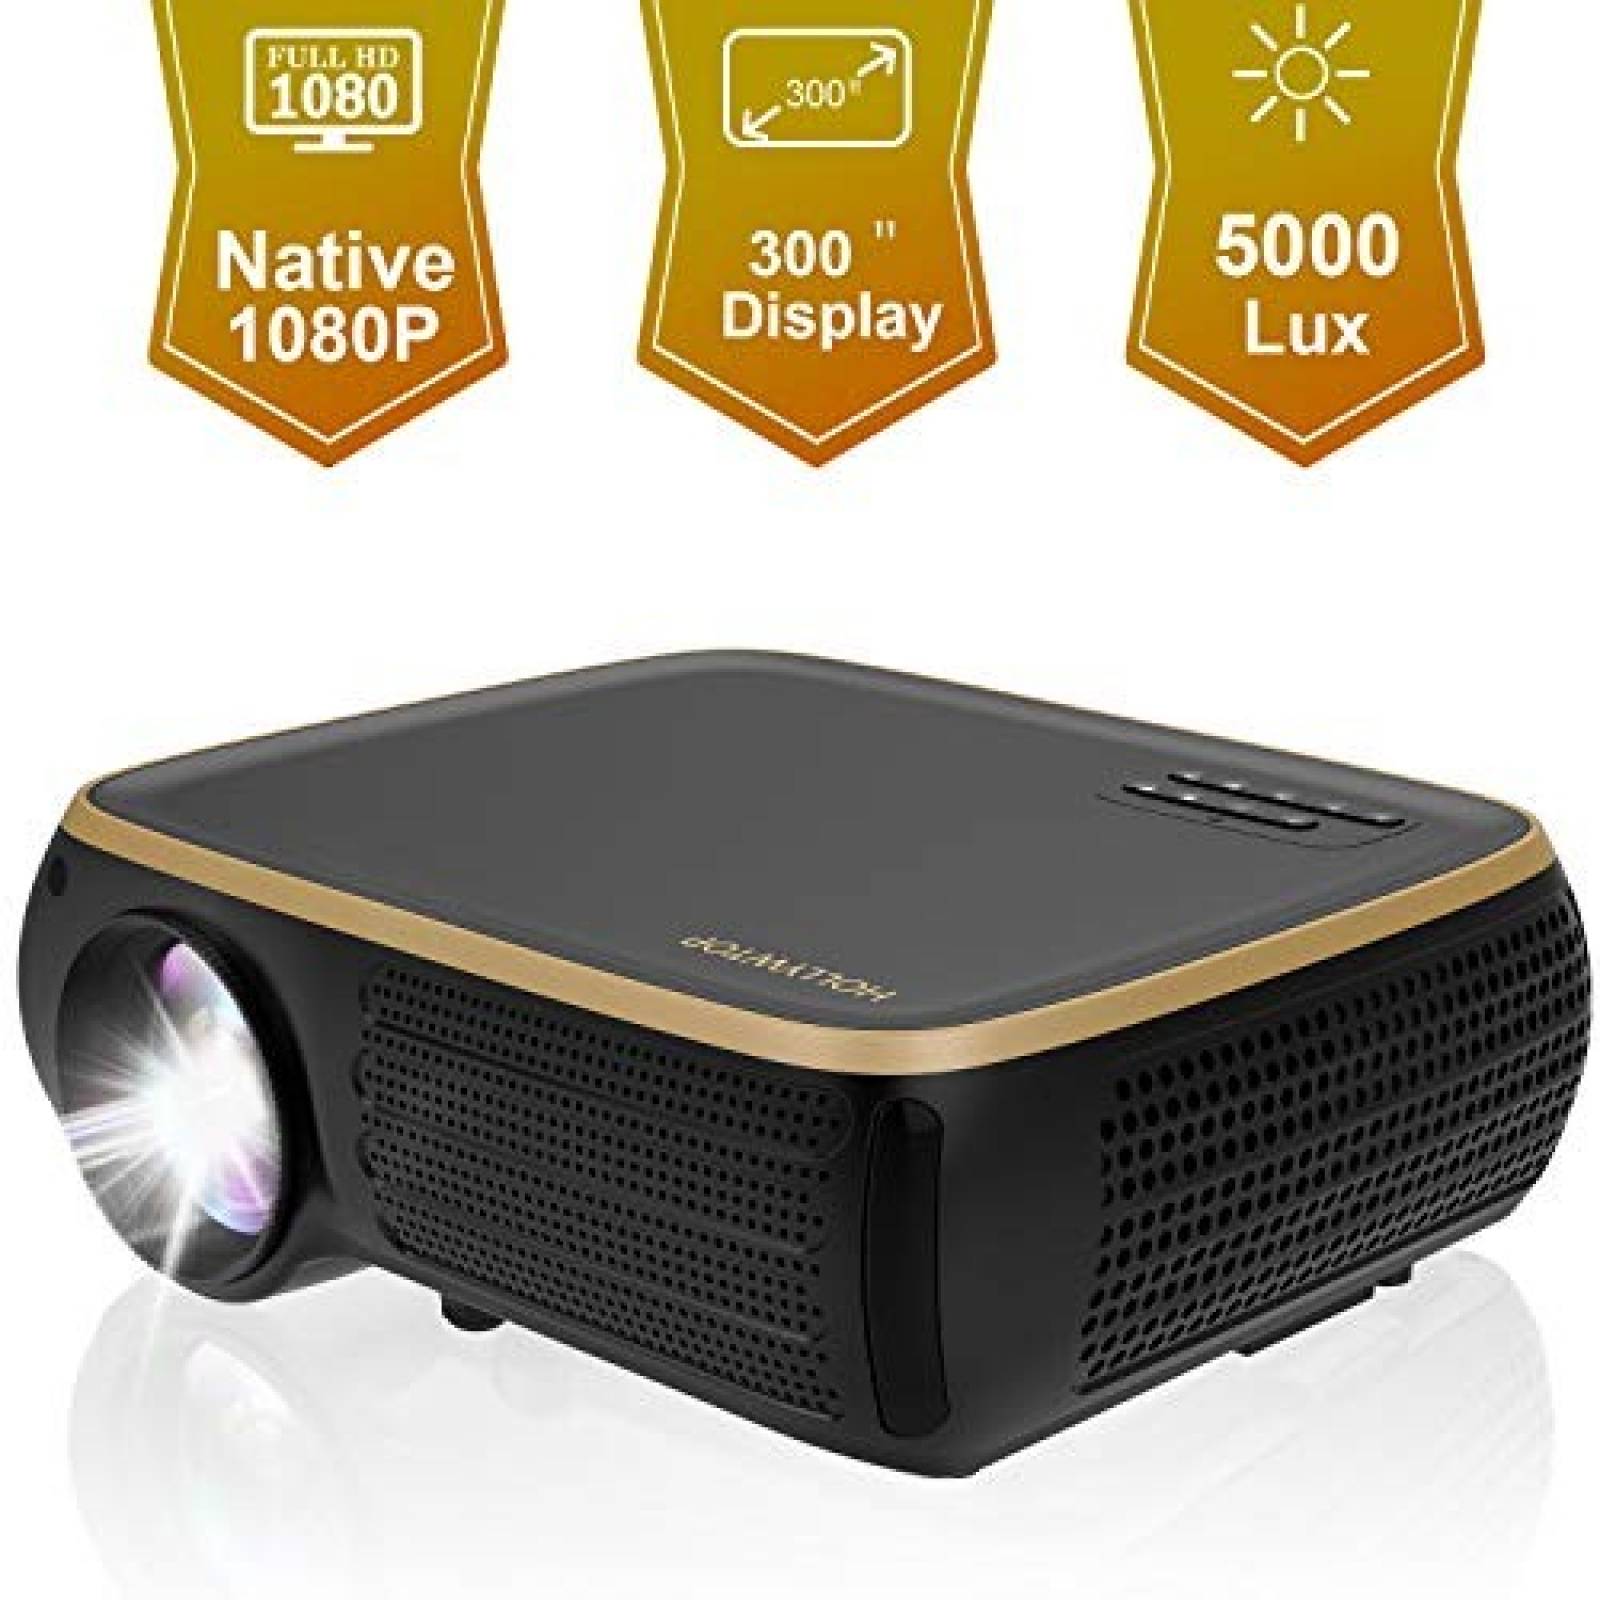 Proyector HOLLYWTOP M8 Native 1080p 5000lux 300'' -Negro